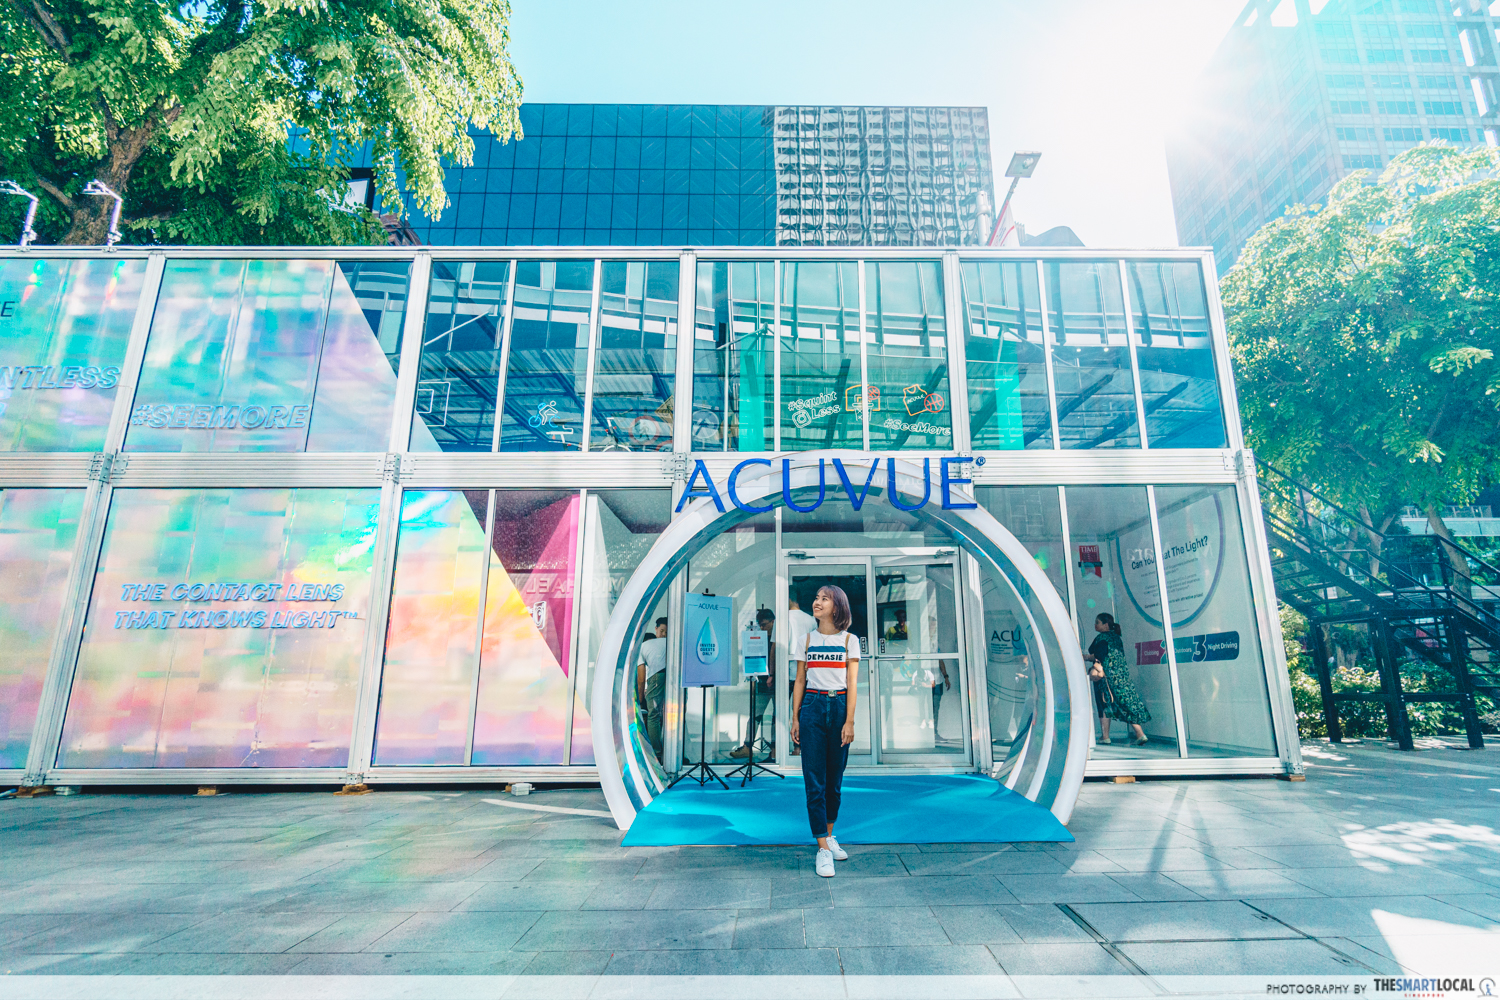 ACUVUE Pop-Up store along Orchard Road